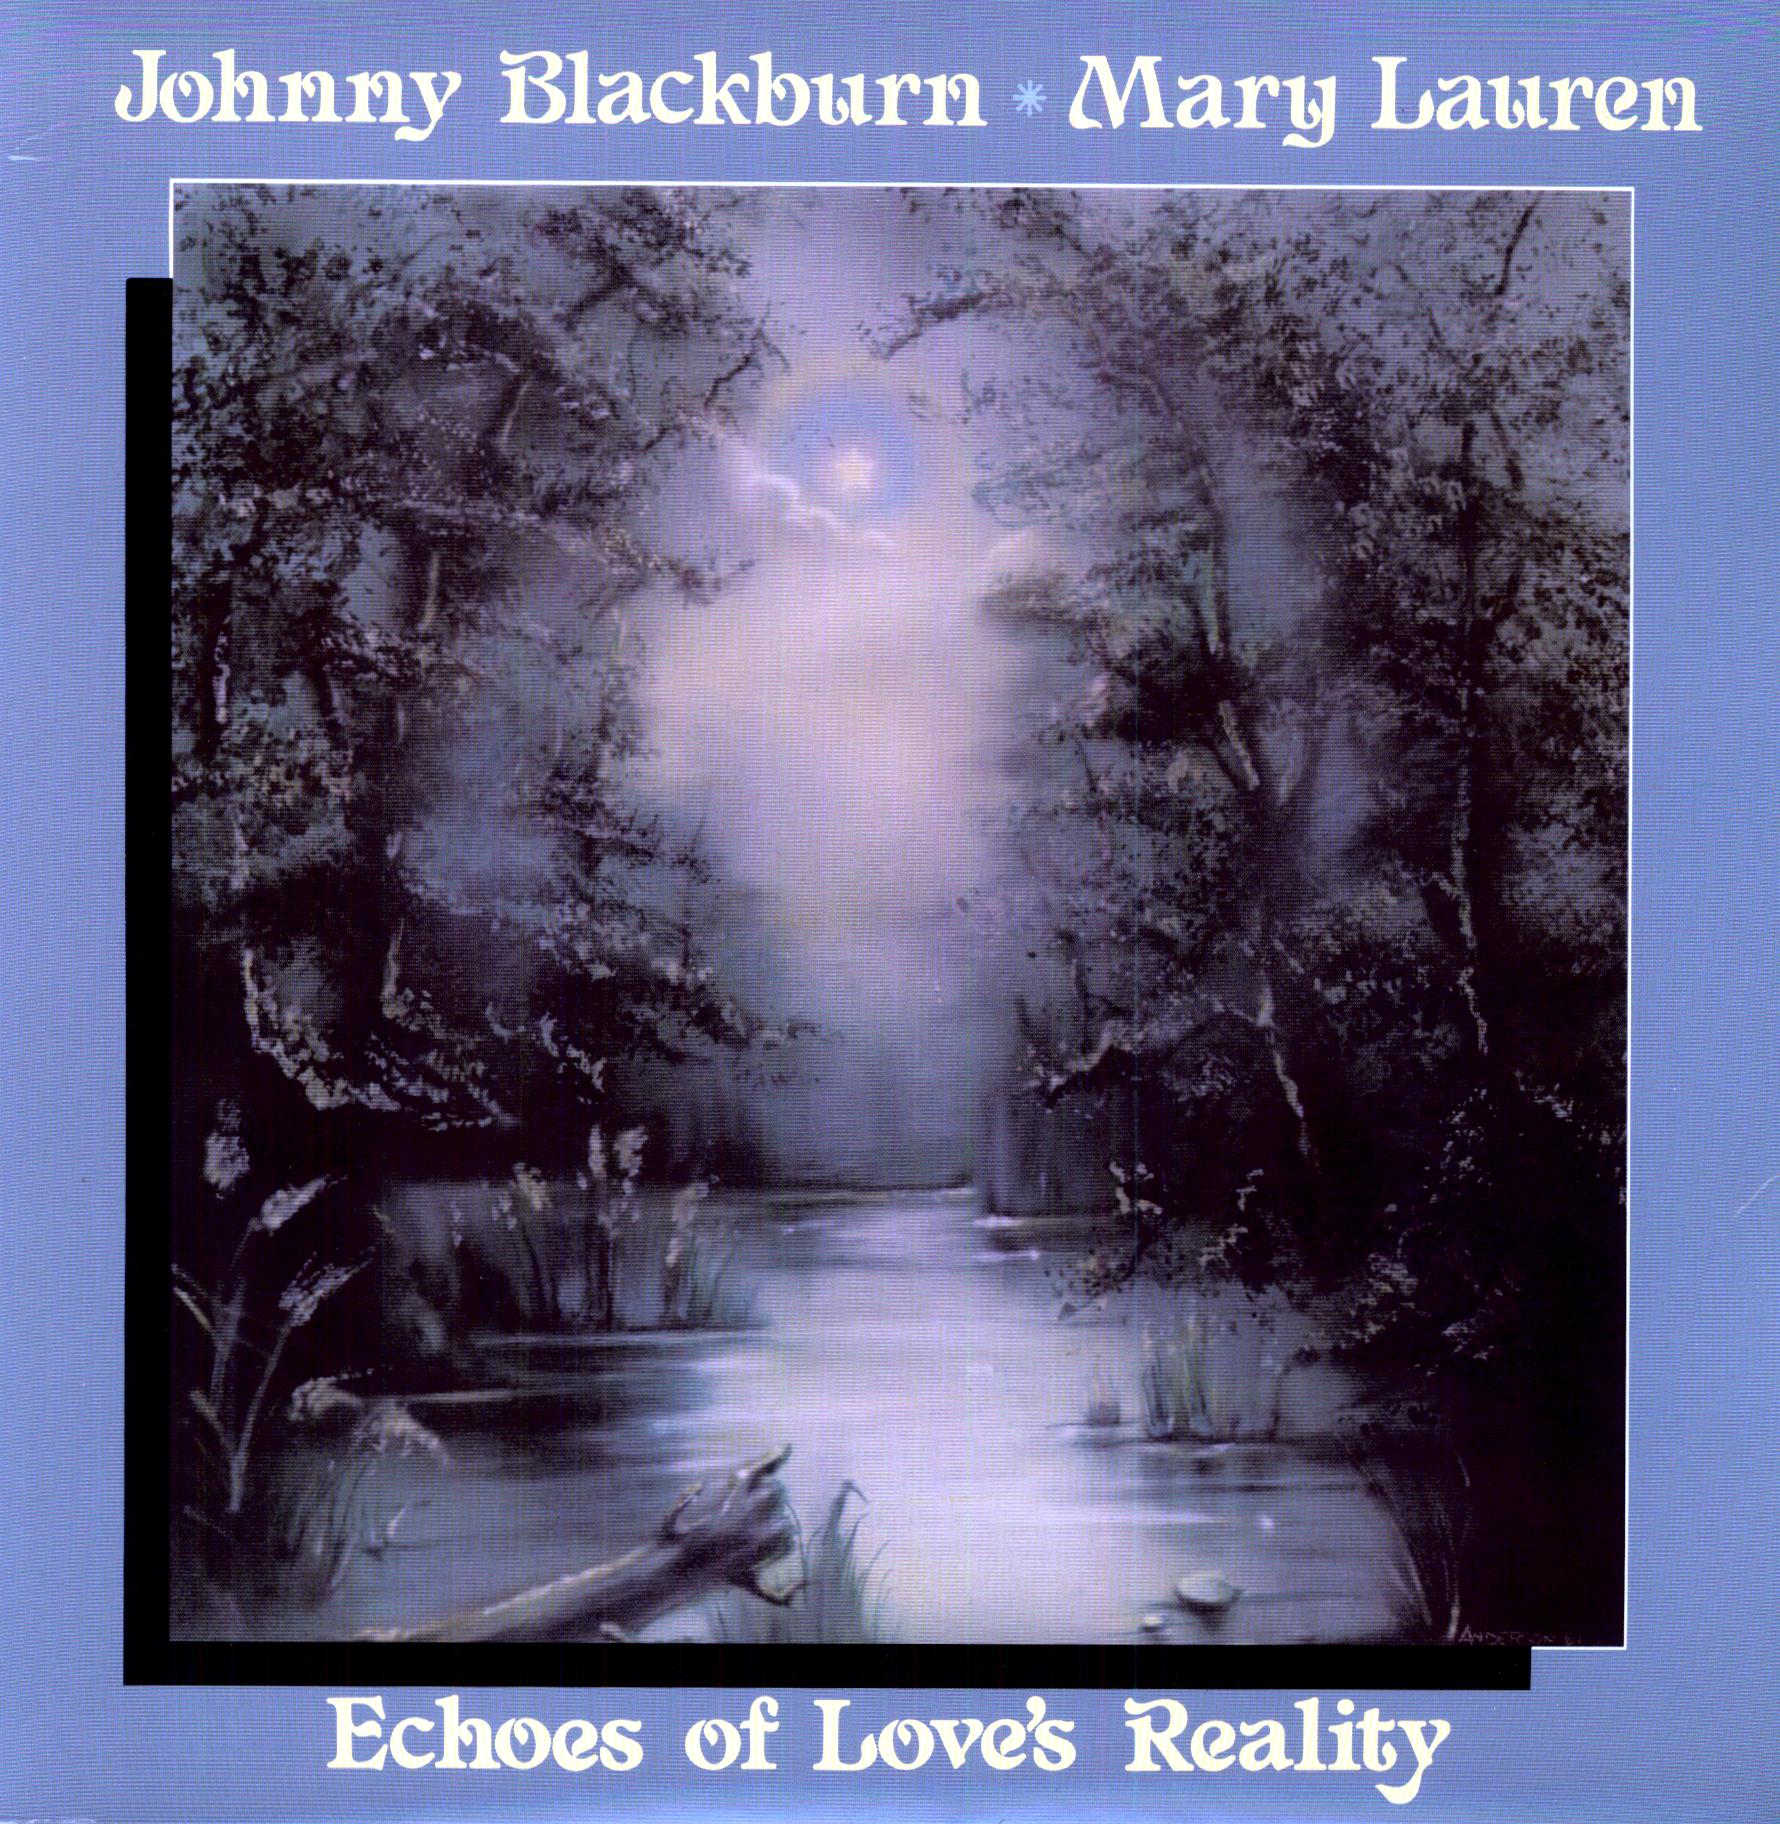 ECHOES OF LOVE'S REALITY